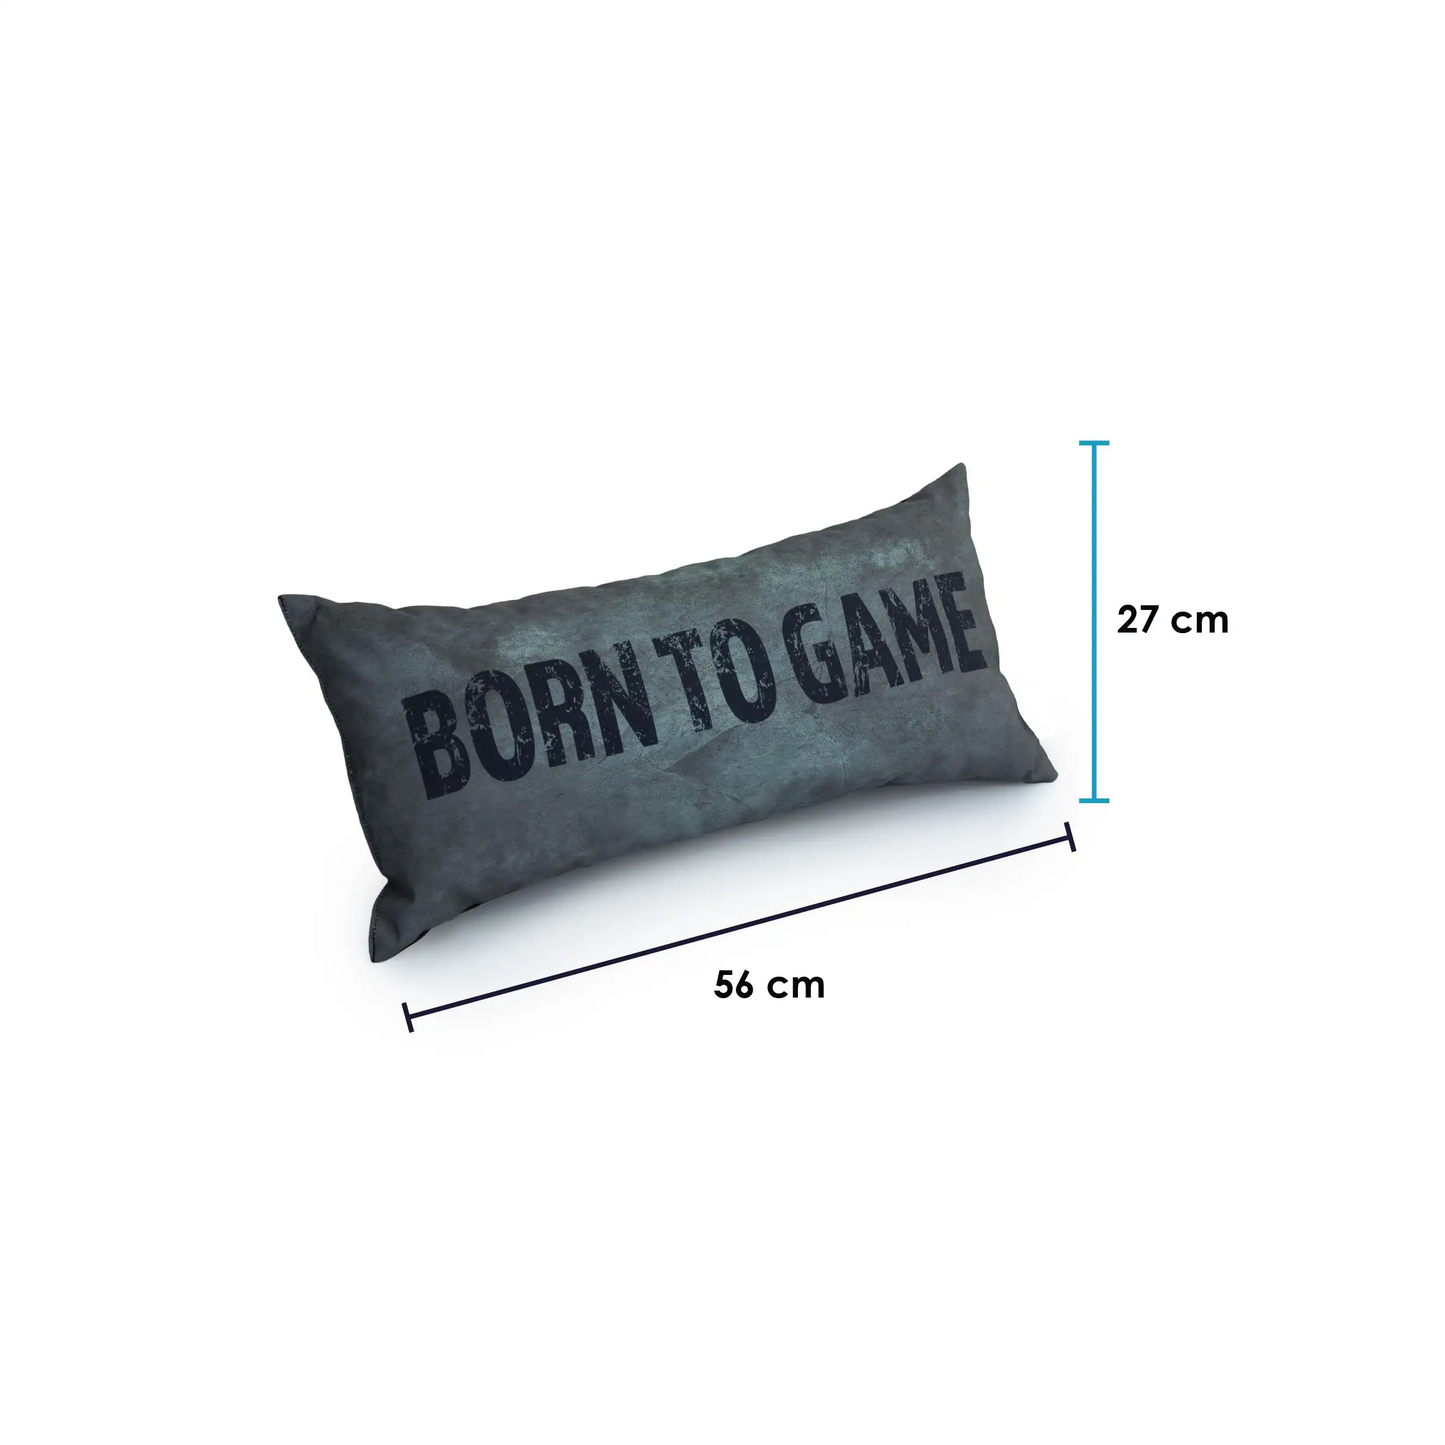 A rectangular pillow with the black text "BORN TO GAME".